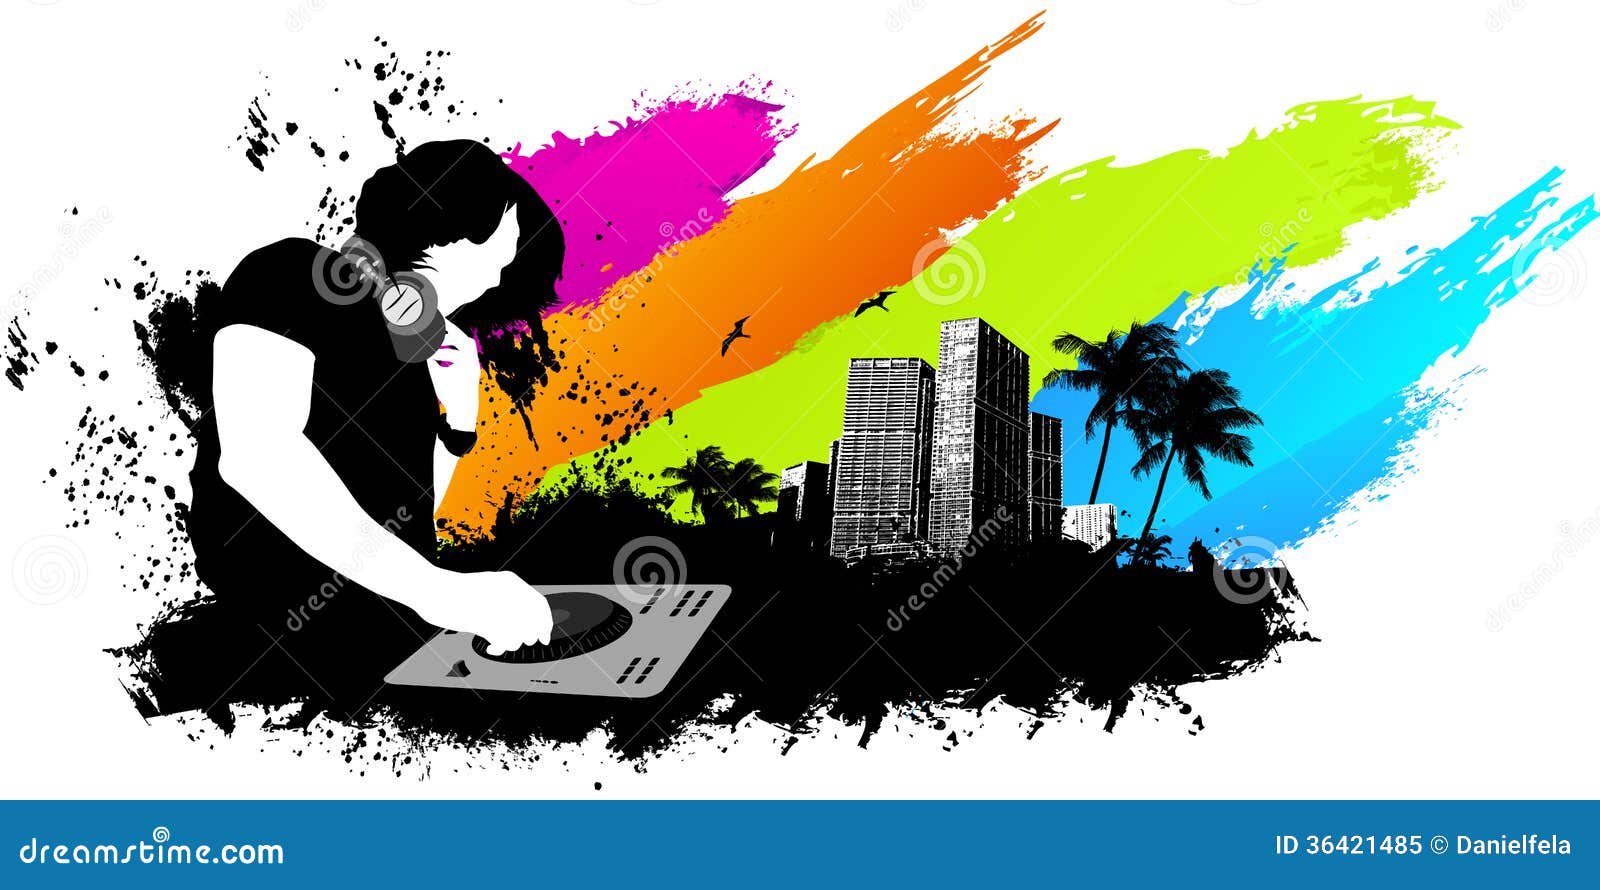 Dirty Dj Background Stock Illustrations 65 Dirty Dj Background Stock Illustrations Vectors Clipart Dreamstime